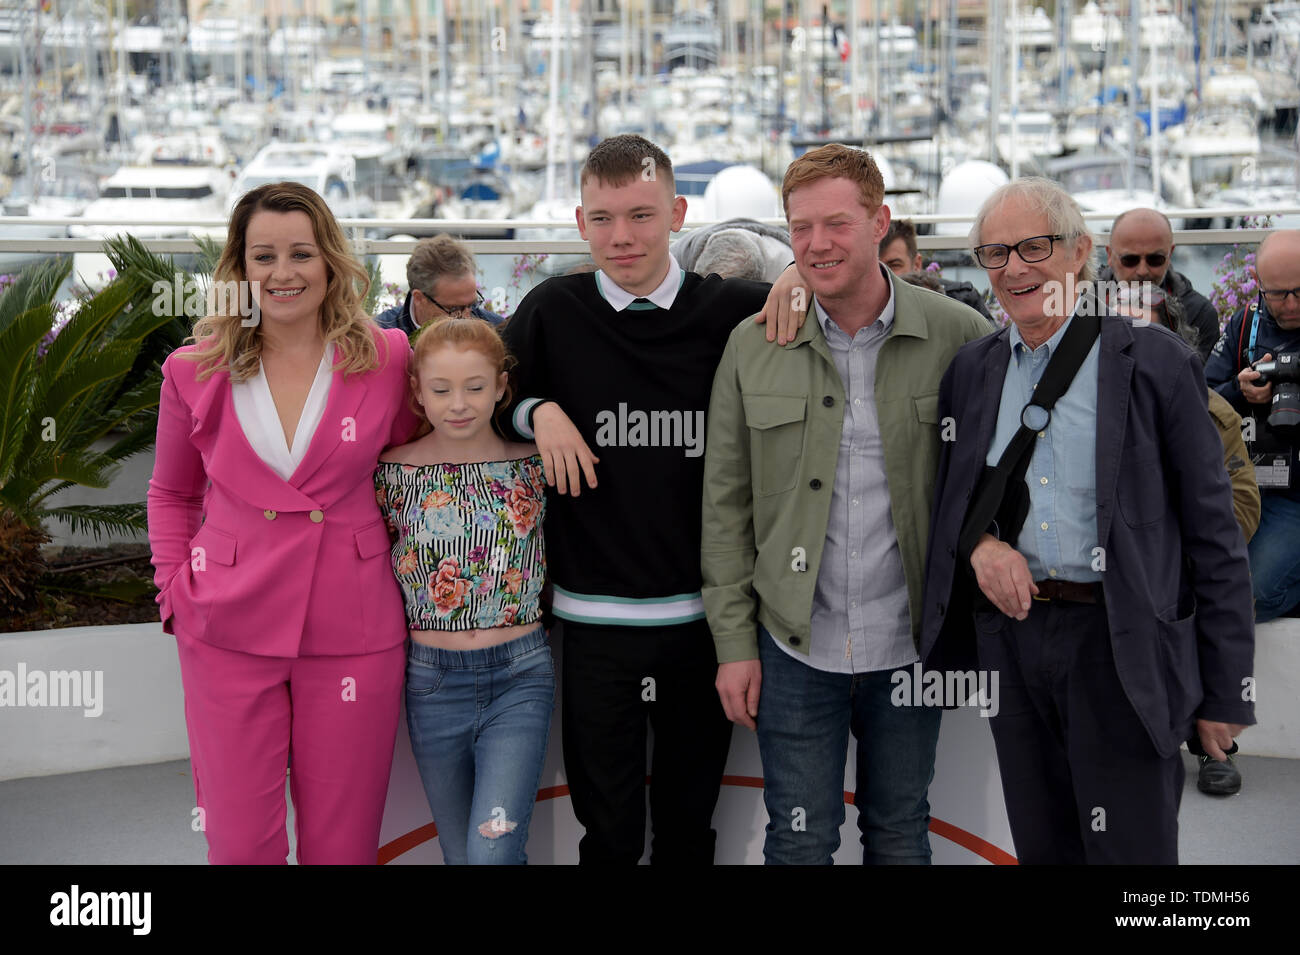 72nd Cannes Film Festival 2019, Photocall film : Sorry, we missed you Pictured: Ken Loach, Kris Hitchen, Debbie Honeywood, Rhys Stone, Katie Proctor  Where: Cannes, France When: 17 May 2019 Credit: IPA/WENN.com  **Only available for publication in UK, USA, Germany, Austria, Switzerland** Stock Photo